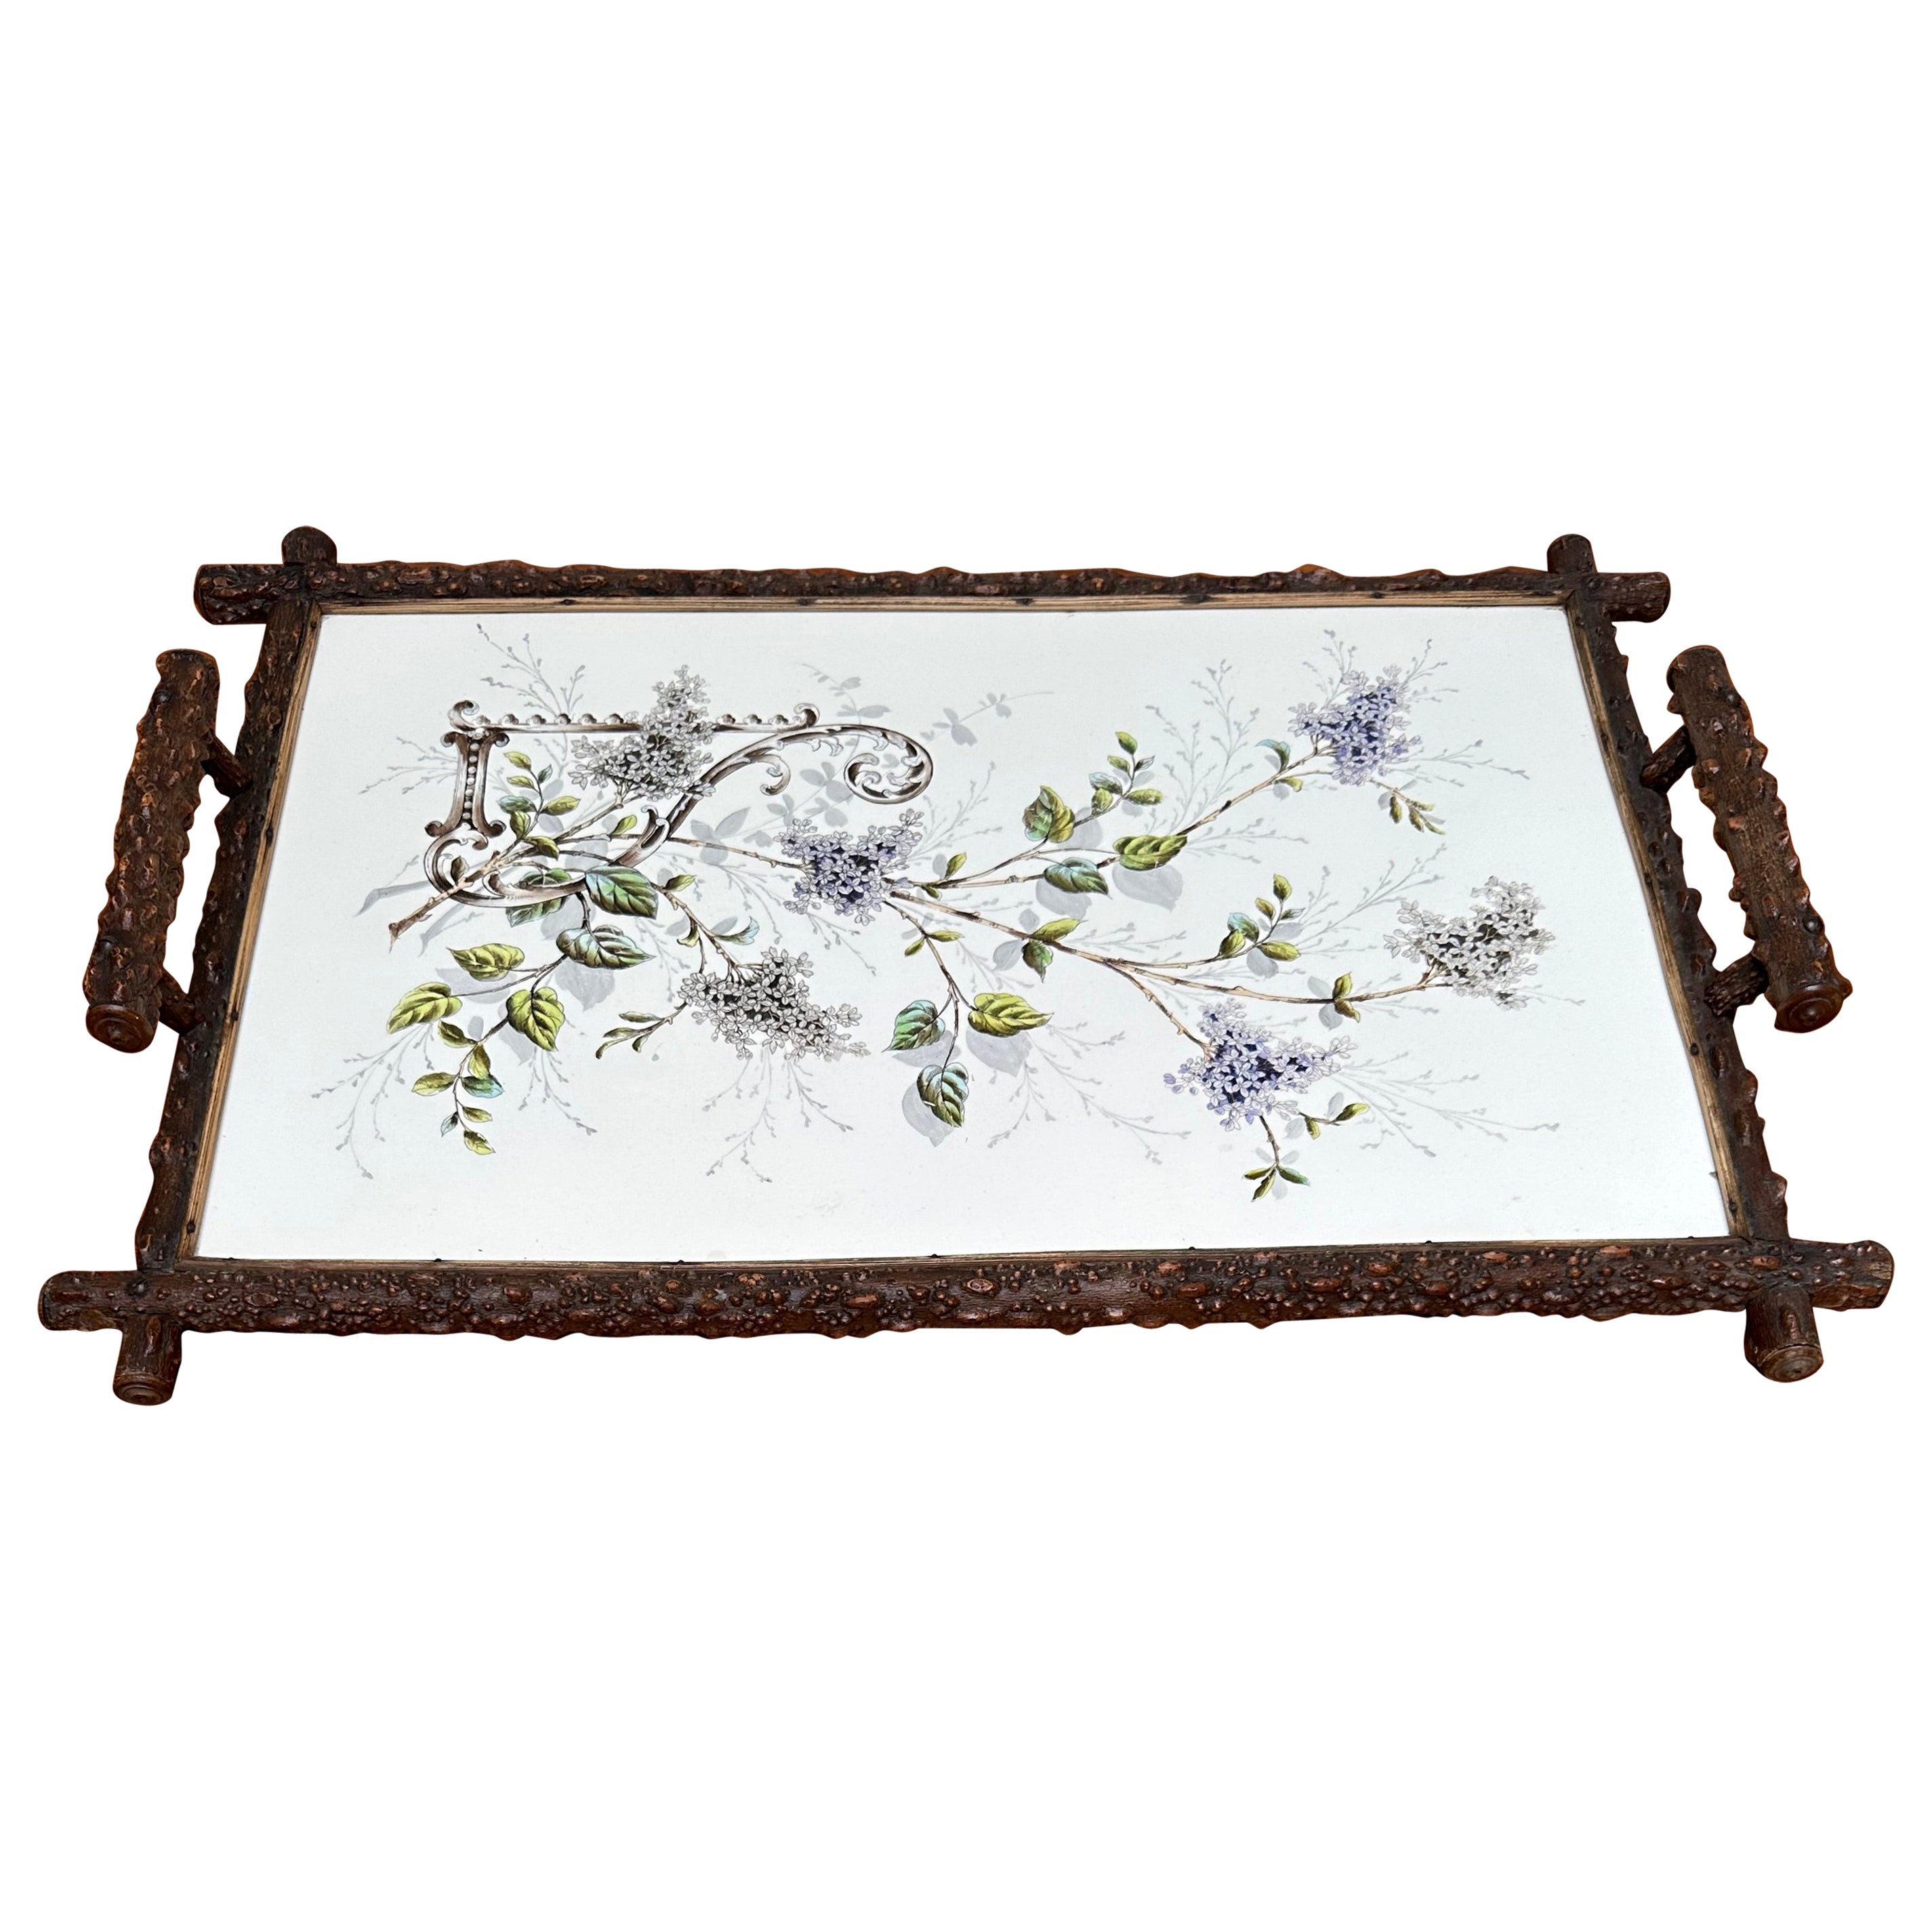 Antique & Extra Large Arts & Crafts Hand Painted Flower Decor, Tile Serving Tray For Sale